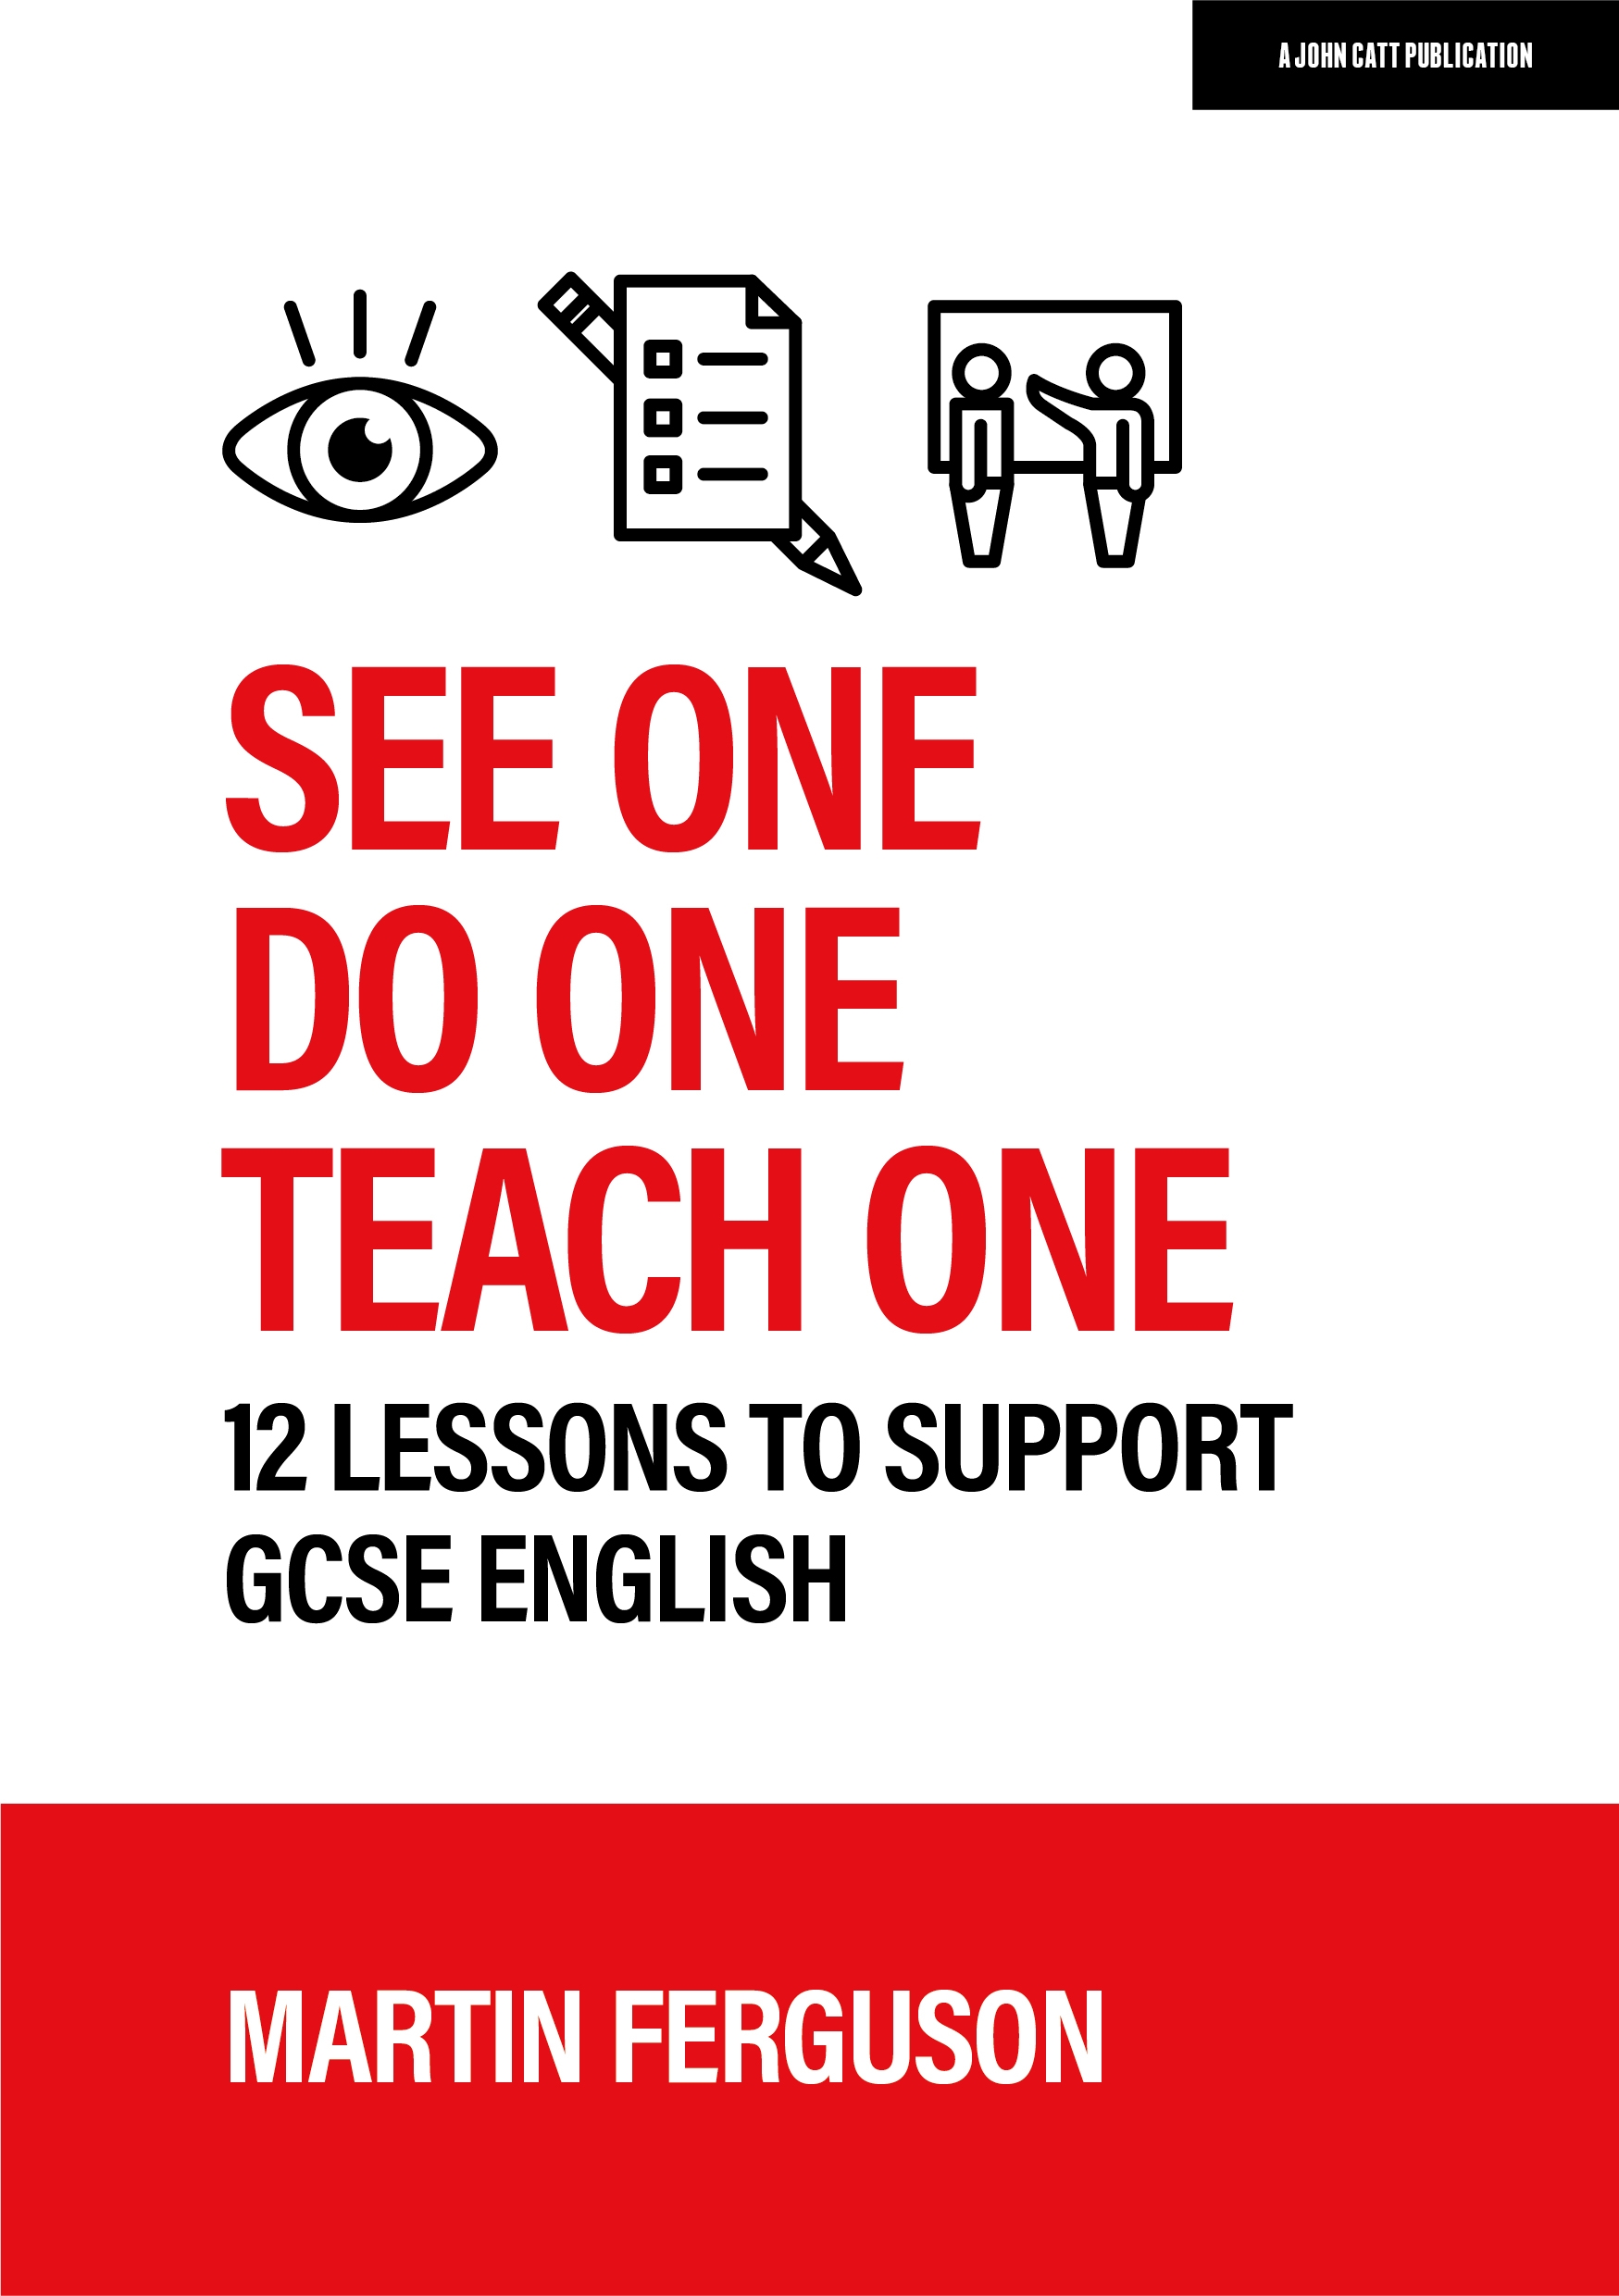 Featured image for “See One. Do One. Teach One: 12 lessons to support GCSE English”